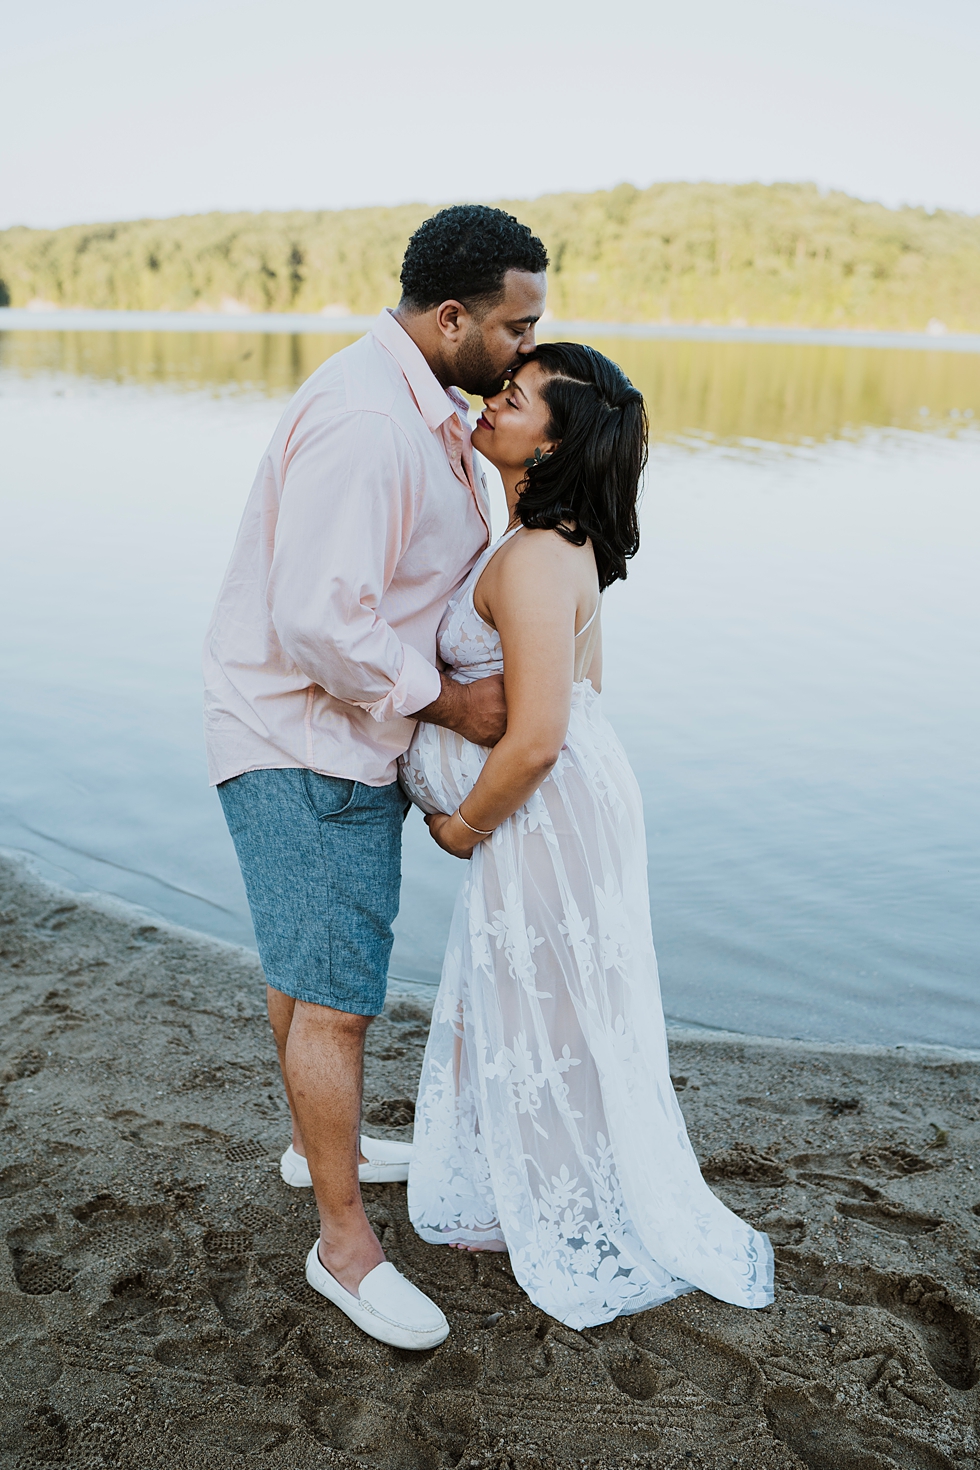  MATERNITY PHOTO SHOOT KISS ON THE BEACH BABY BUMP PHOTOS CINCINNATI PHOTO SHOOT MATERNITY PHOTOGRAPHER WHITER LACE DRESS WITH SHEER BOTTOM #photographer #maternityphotos #pregnancy #babybump #maternityphotoshoot #cincinnatiphotographer #louisvilleph